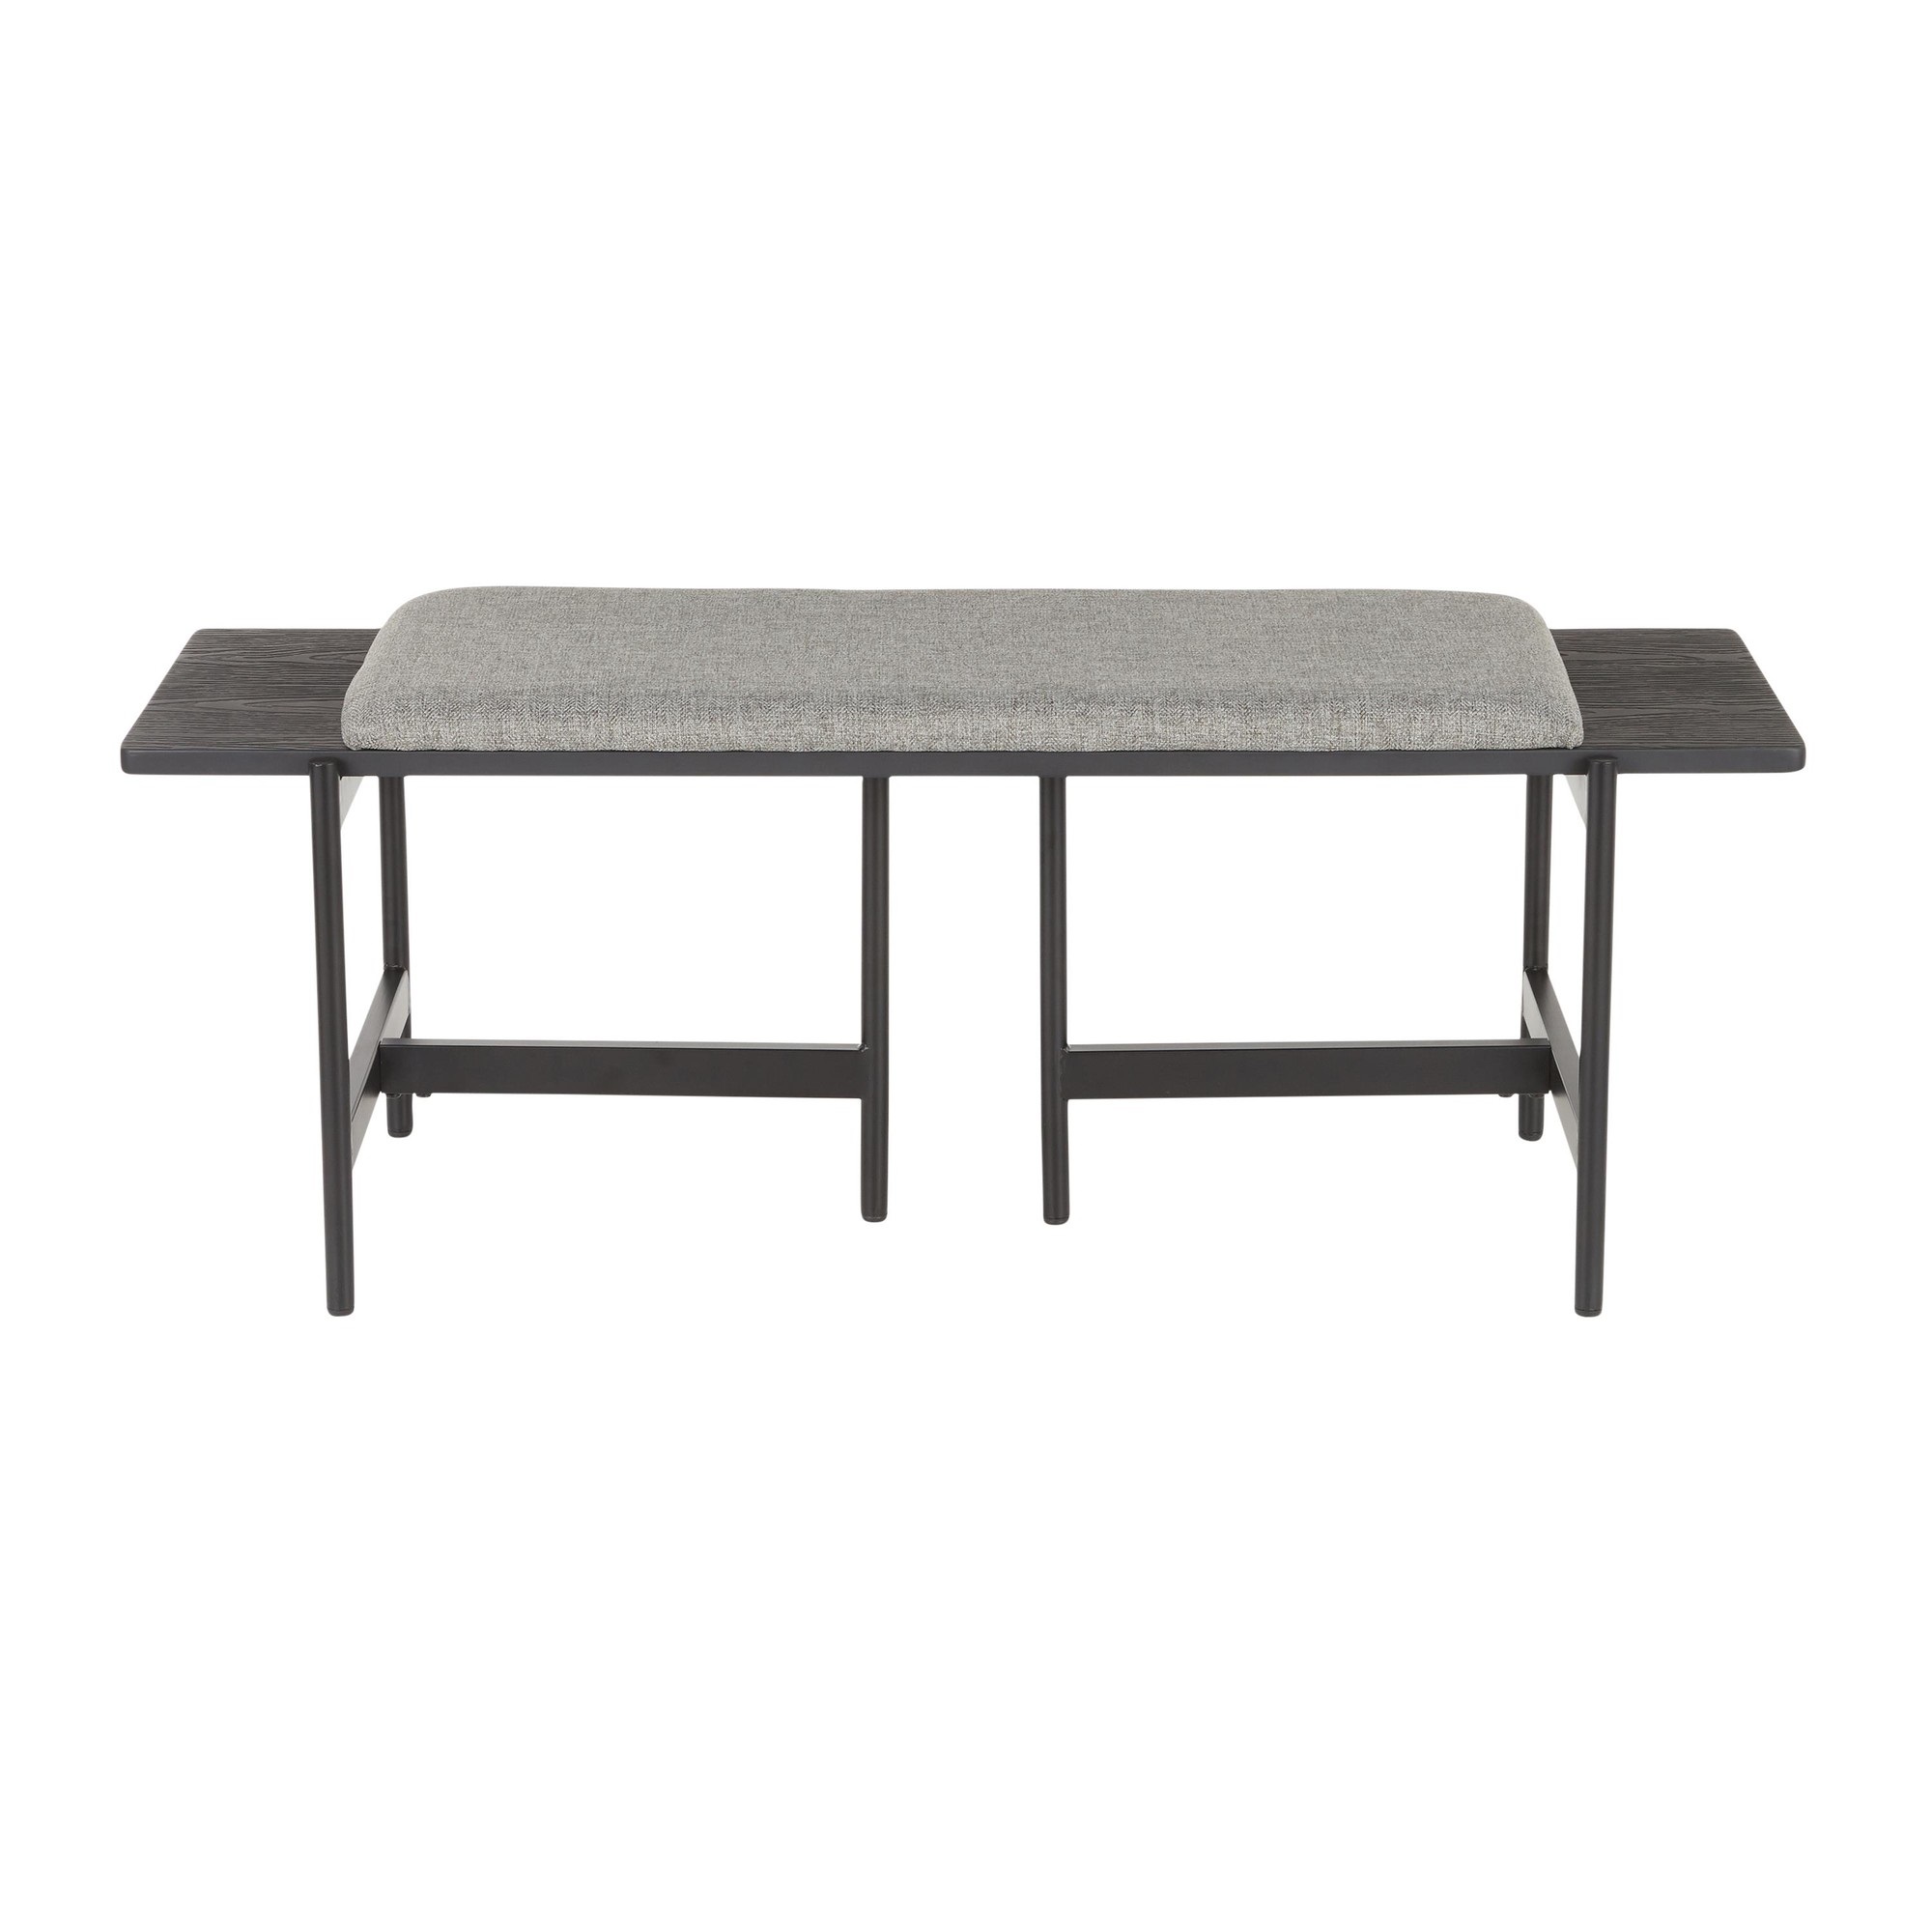 Chloe Contemporary Bench in Black Metal and Grey Fabric with Black Wood Accents by LumiSource - image 5 of 6